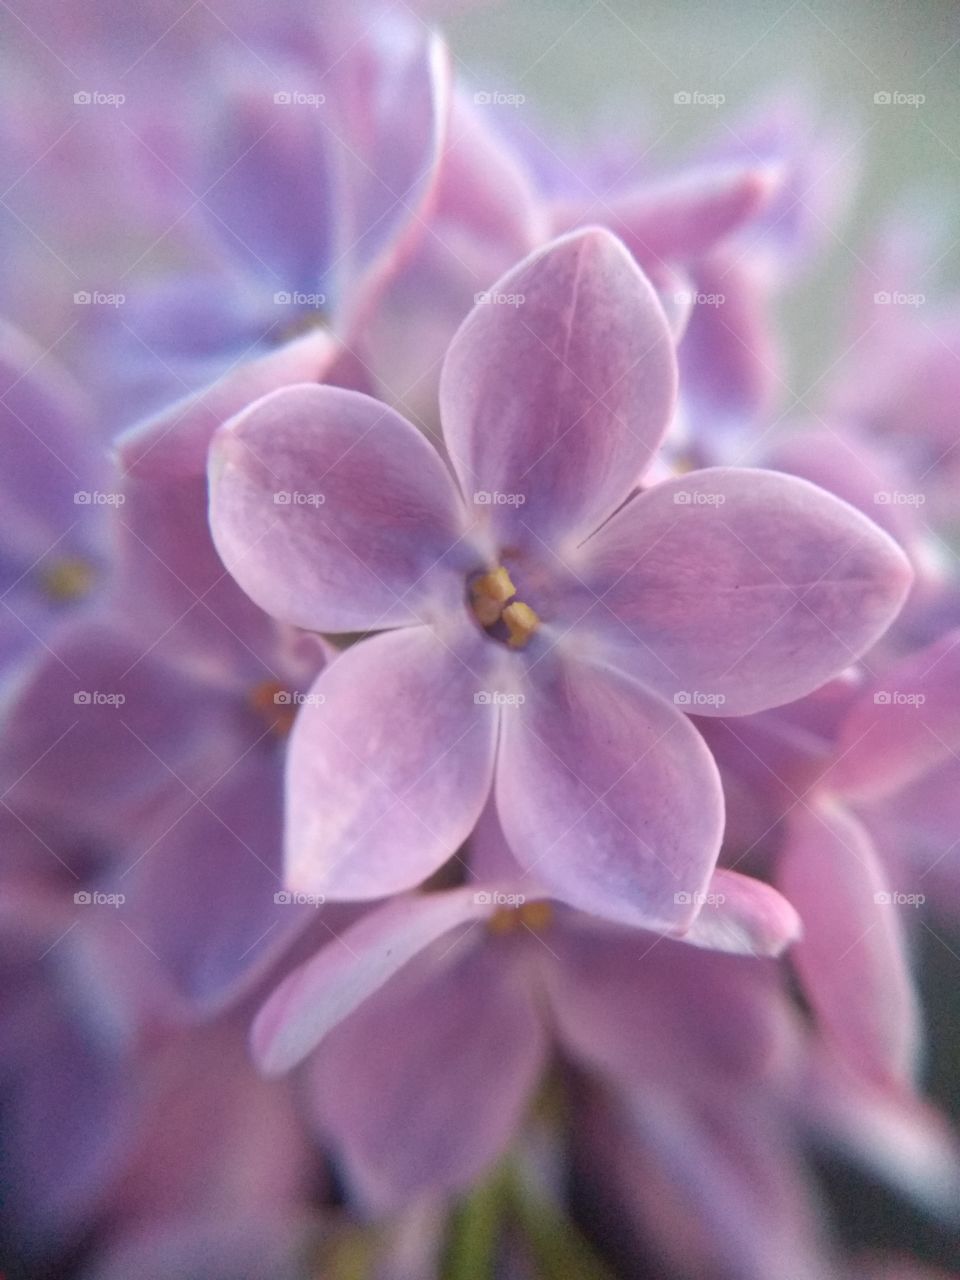 Lilac flower with five petals